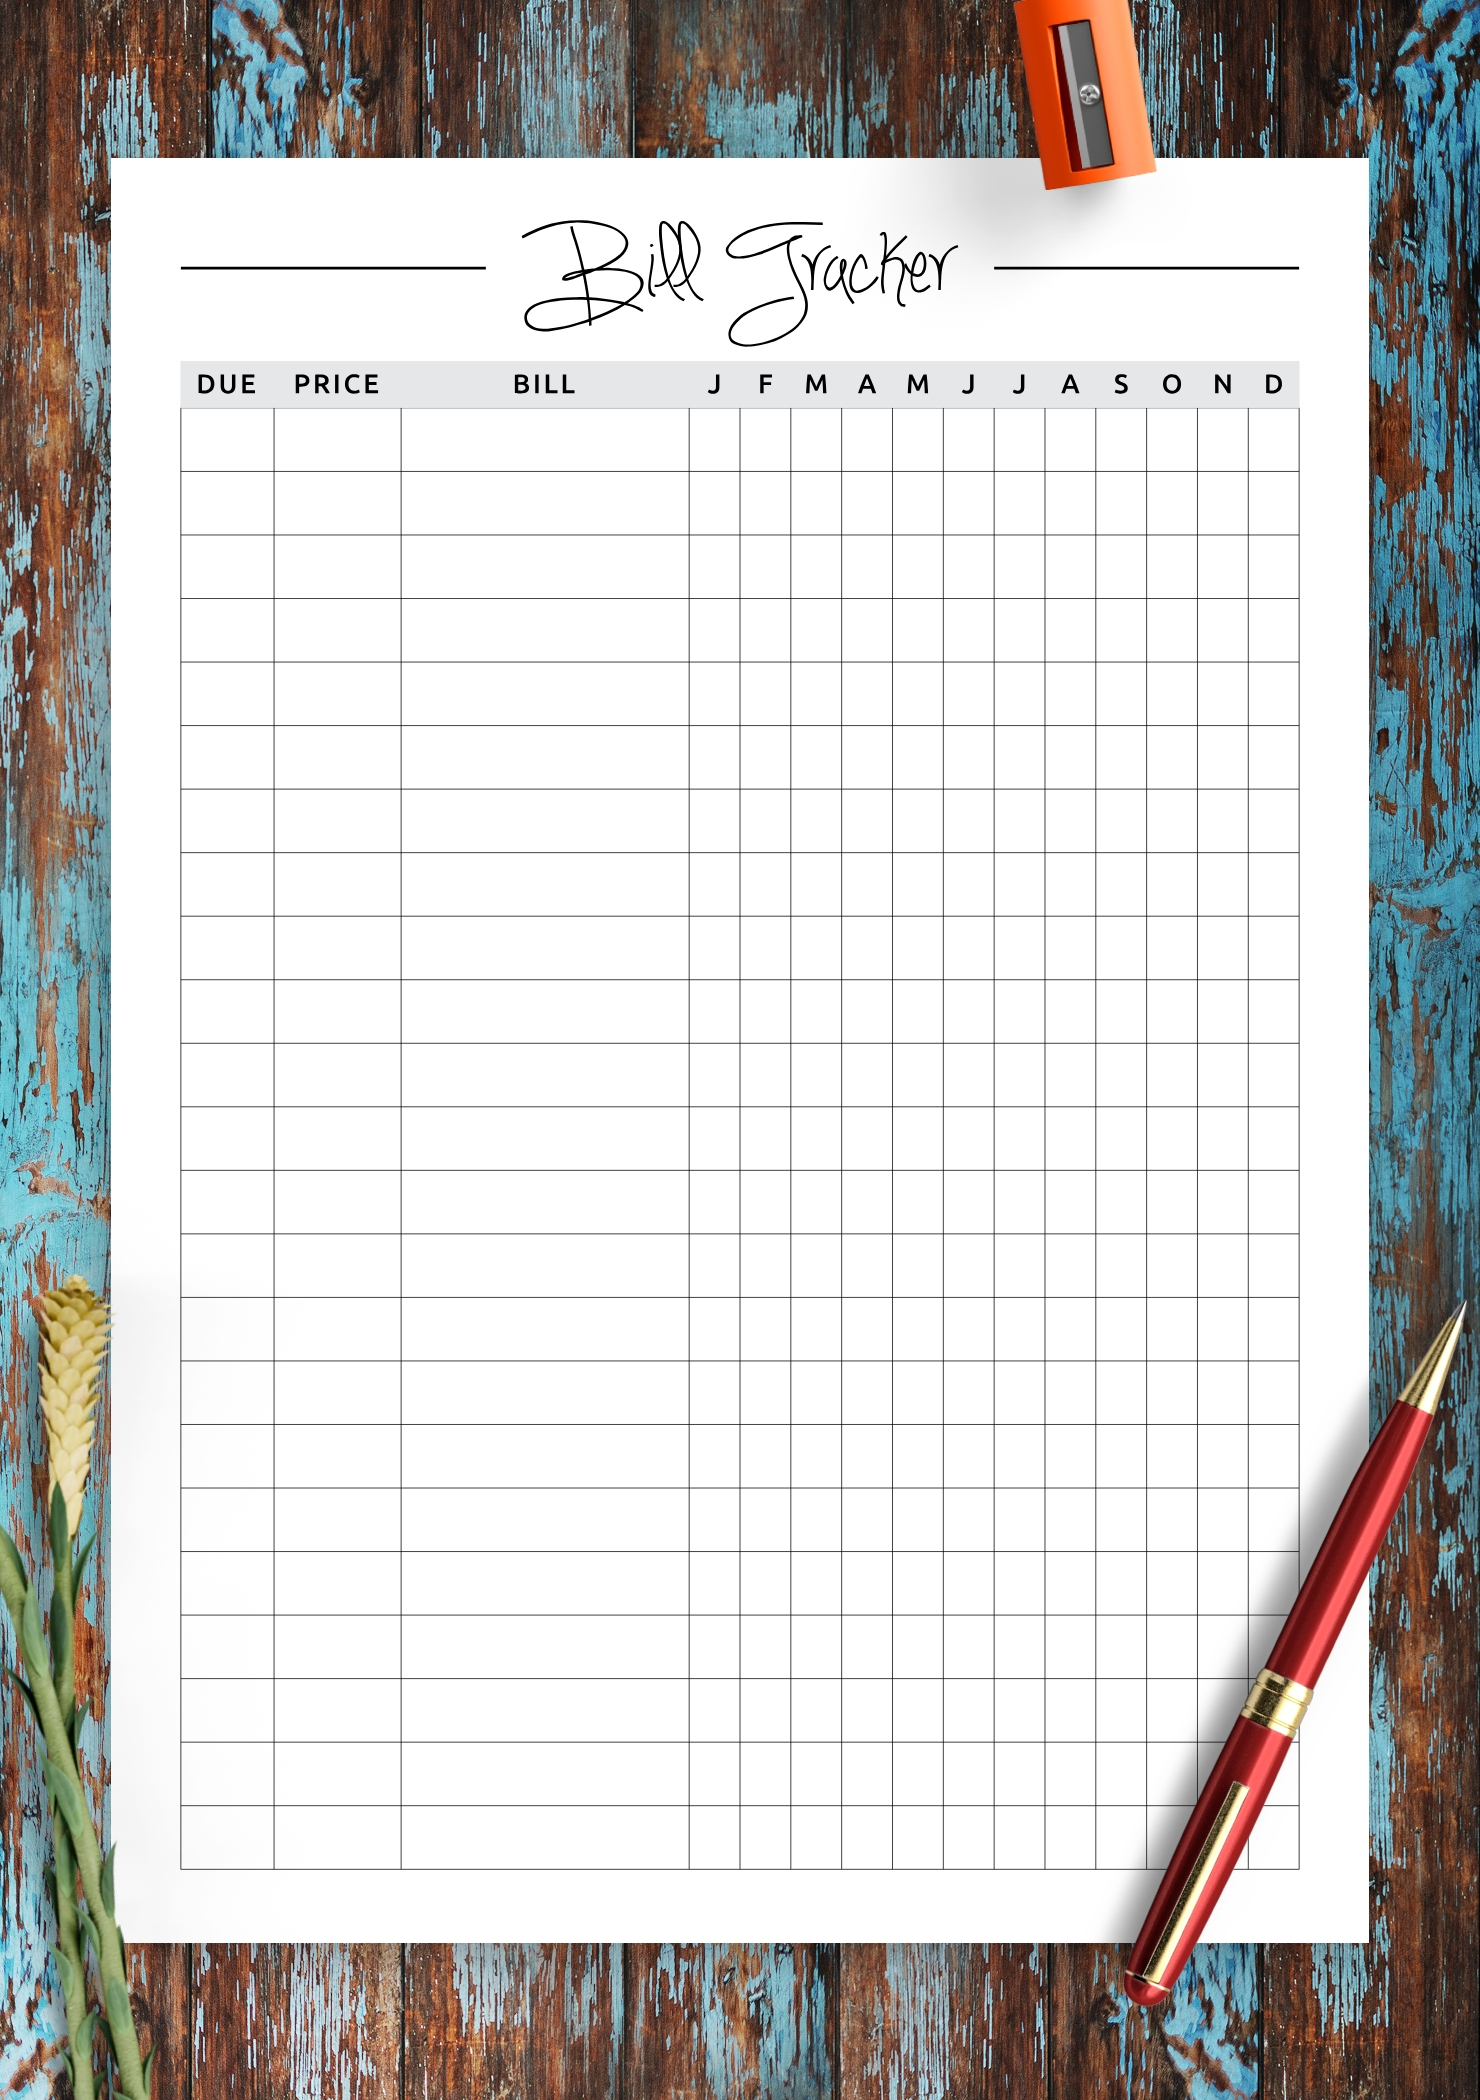 Fillable Monthly Bill Payment Worksheet Pdf - Template Free Printable Blank Calendar Grid